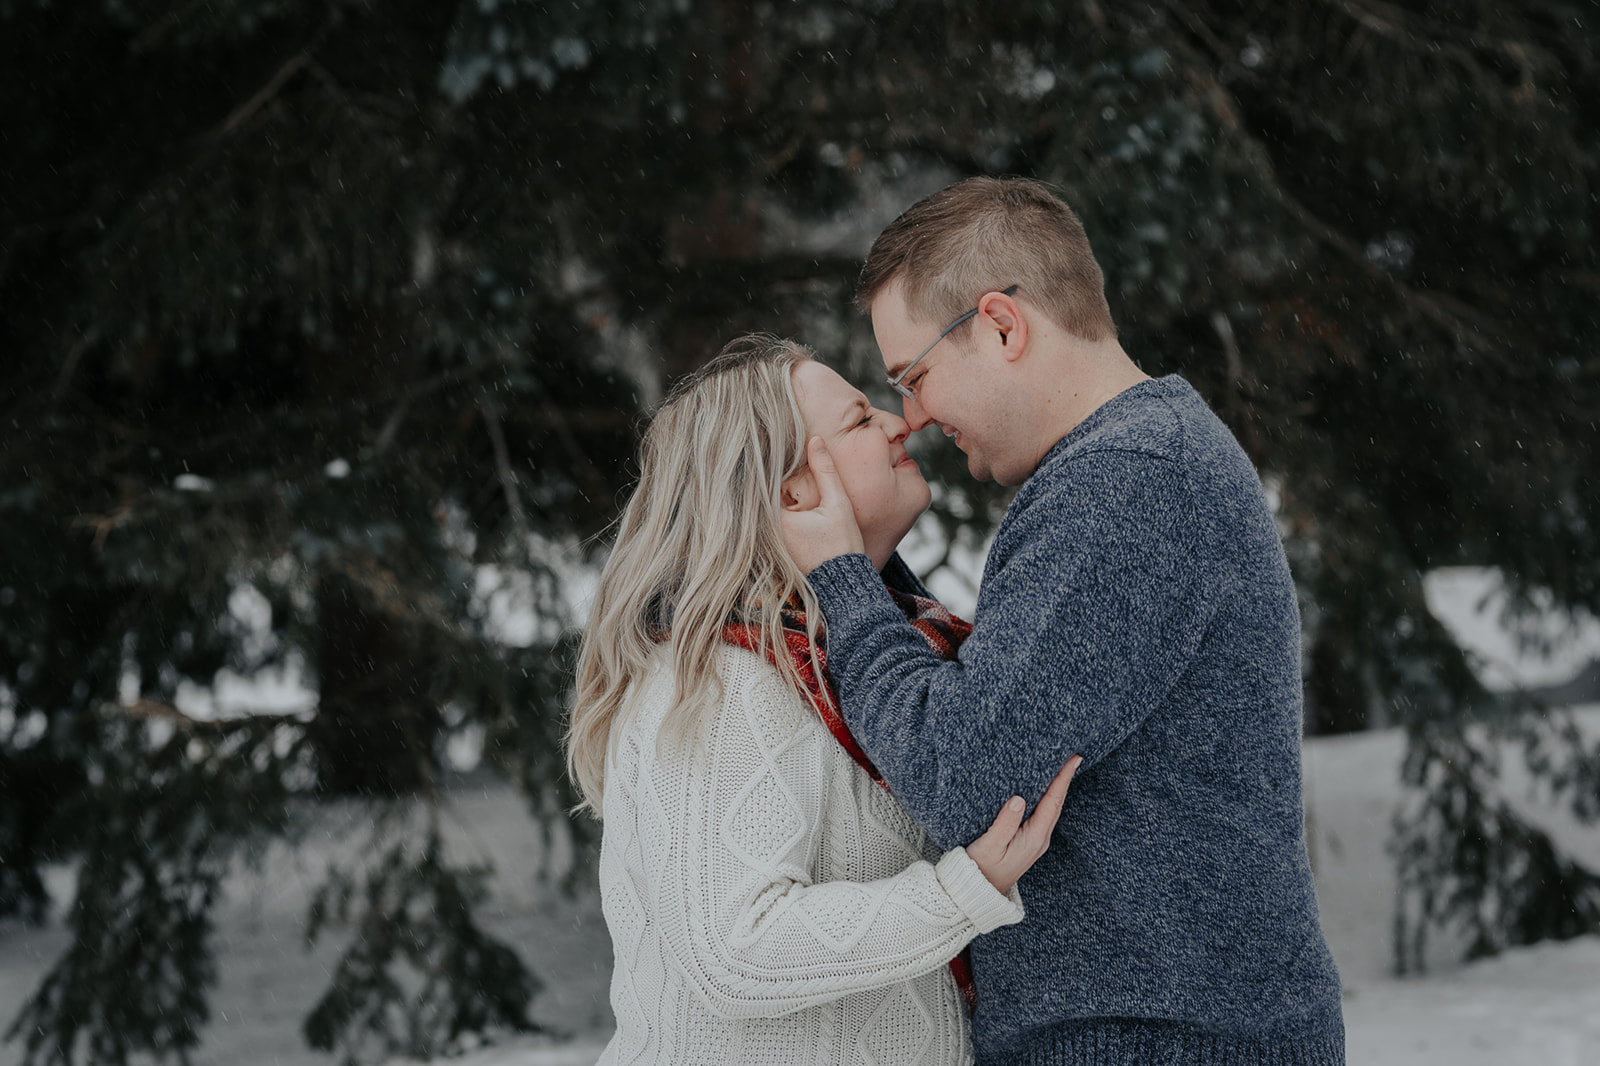 Winter Engagement Session, by Abigail Maki. This blog post includes outfit ideas for an outdoor couples session, and indoor engagement session and posing inspiration. Book your Fargo, ND session session and browse the blog for inspiration #engagement #photography #engagementphotography #fargophotographer